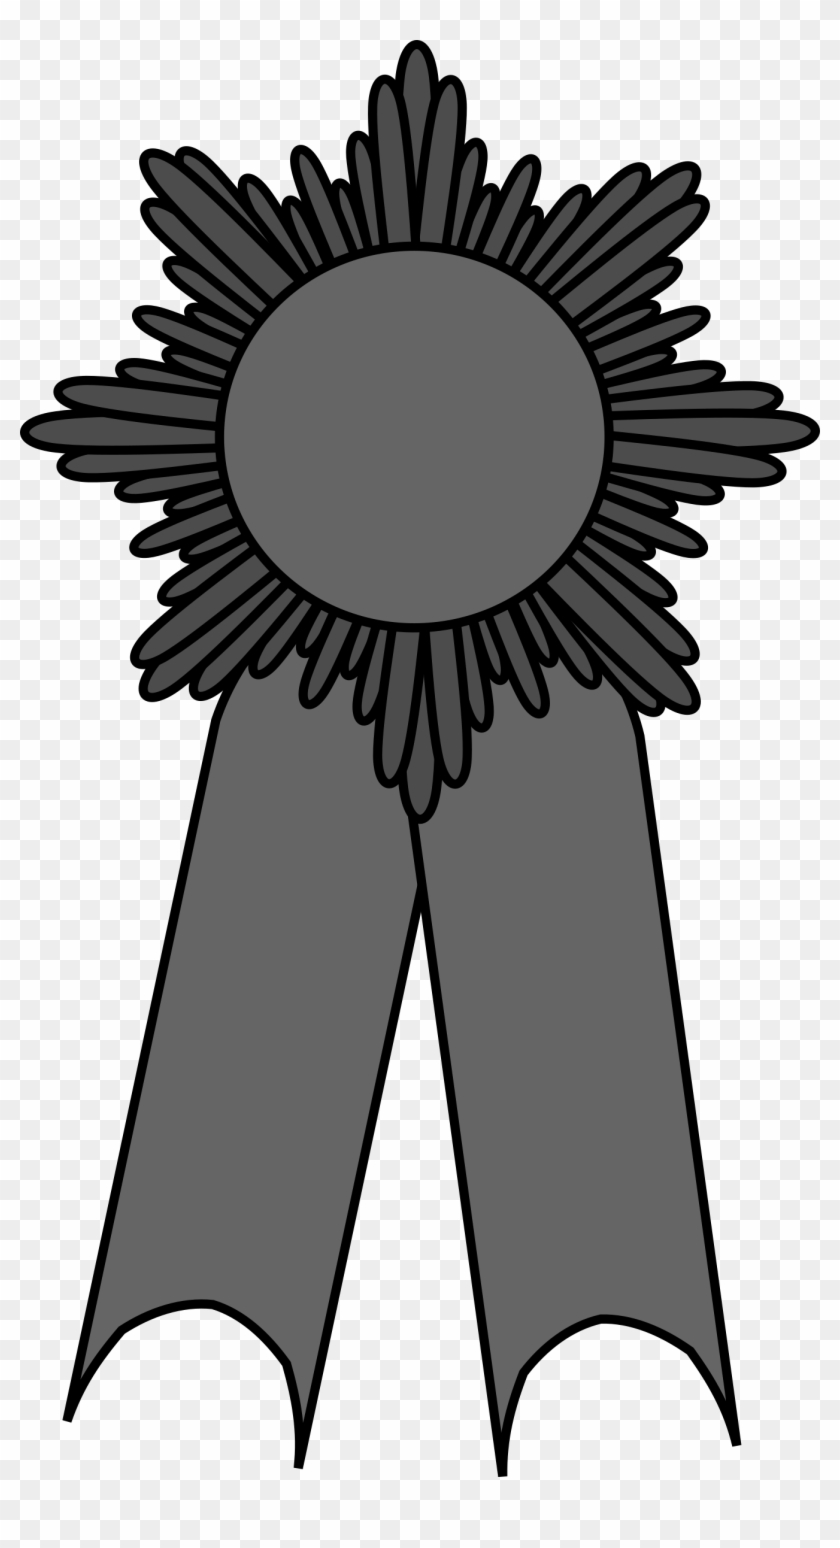 This Free Icons Png Design Of Prize Ribbon Gray - Purple Award Ribbon Clipart Transparent Png #2624764